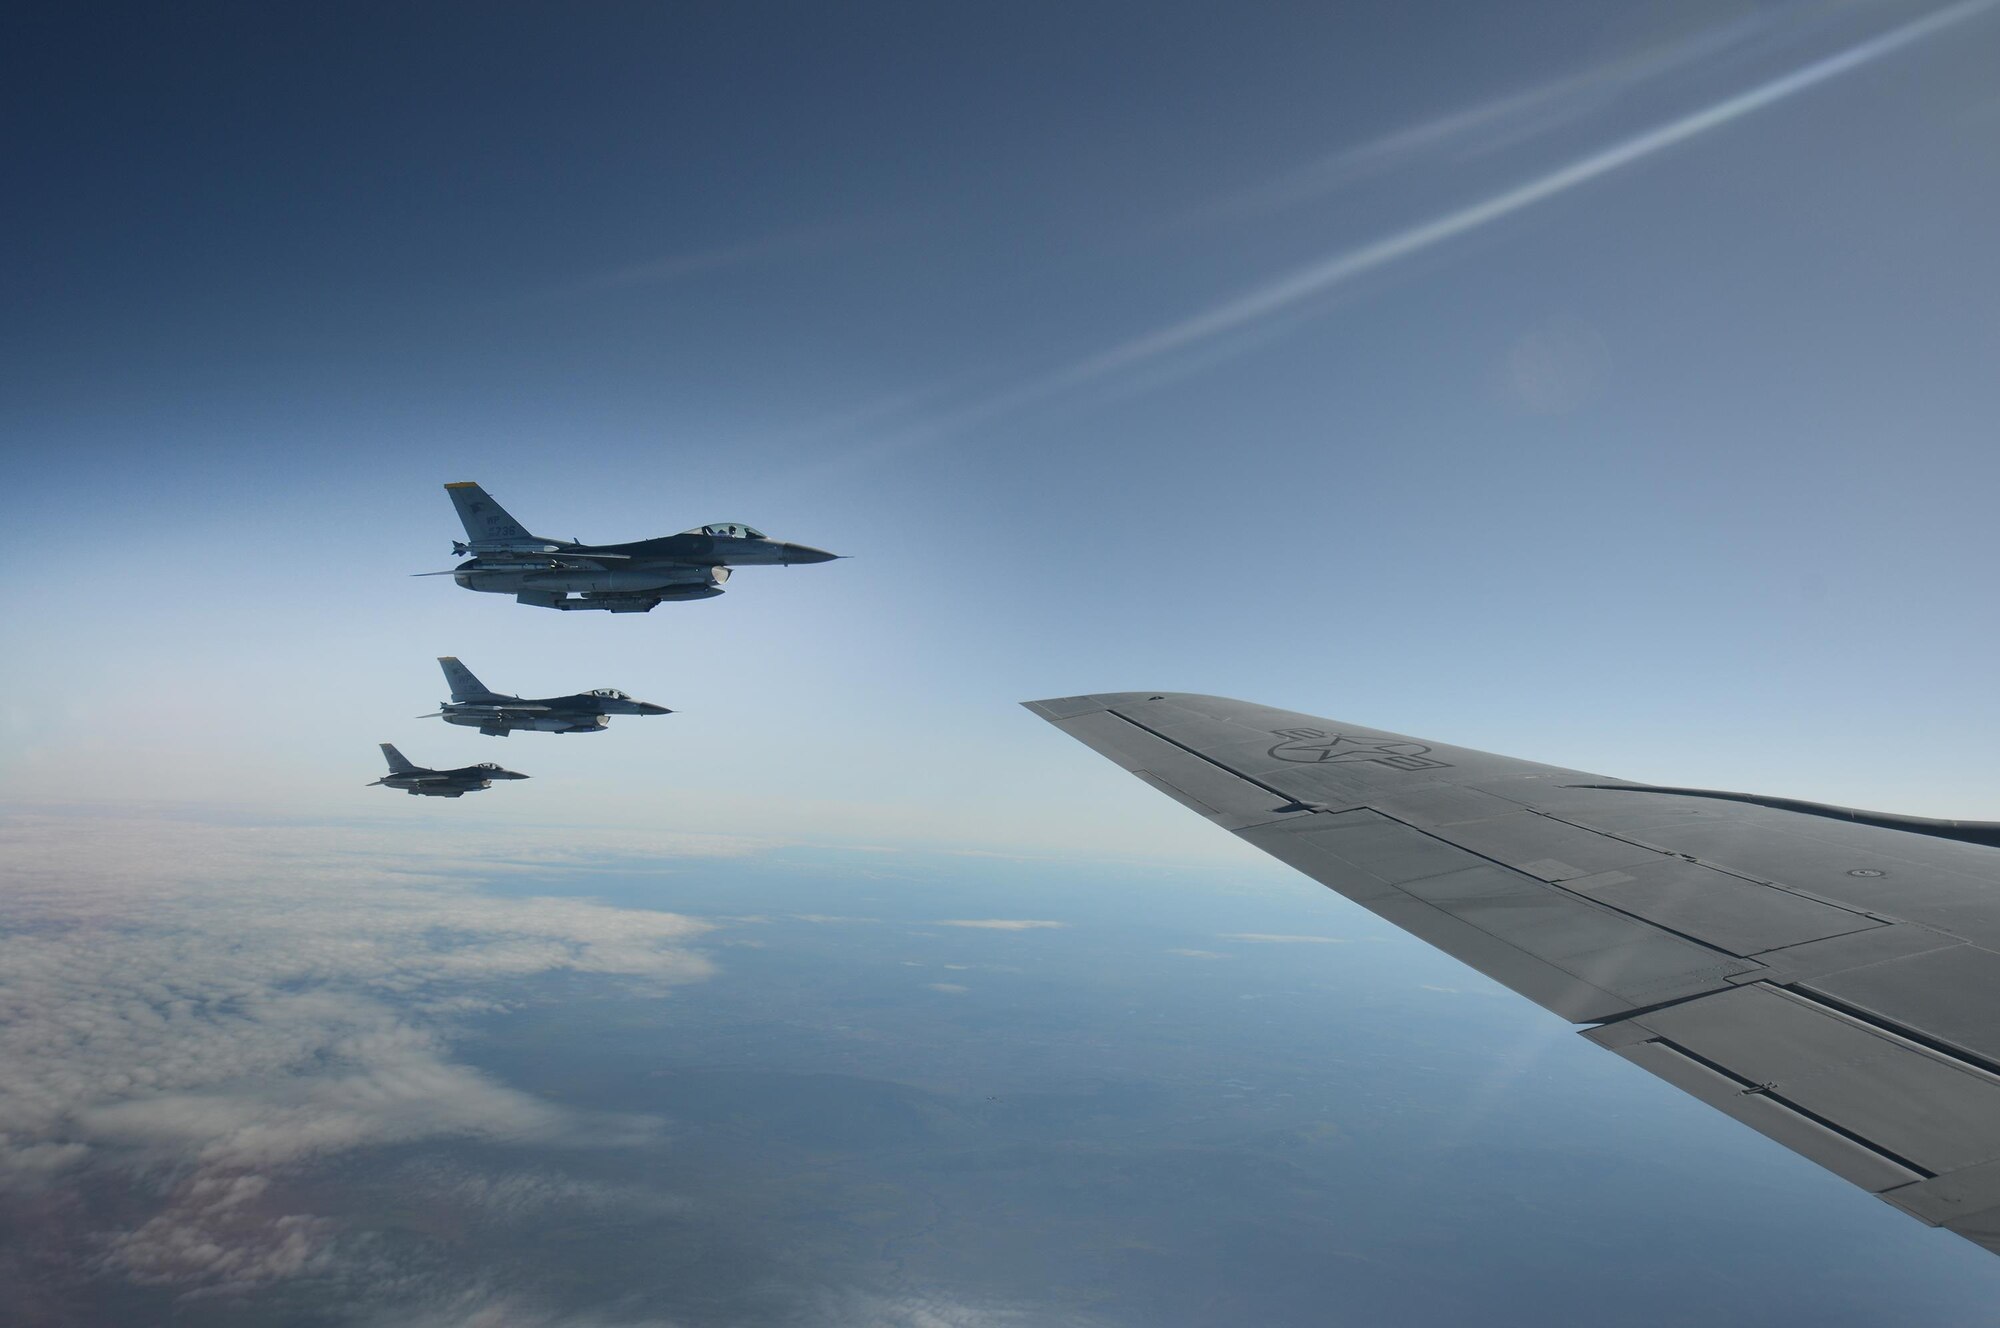 Three F-16 Fighting Falcon’s with the 80th Fighter Squadron, Kunsan Air Base, Republic of Korea, fly alongside a KC-135 Stratotanker from the 909th Air Refueling Squadron, Kadena Air Base, Japan, May 12, 2016, inside the Joint Pacific Alaska Range Complex. The JPARC provides a realistic training environment and allows commanders to train for full spectrum engagements, ranging from individual skills to complex, large-scale joint engagements. (U.S. Air Force photo by Tech. Sgt. Steven R. Doty)